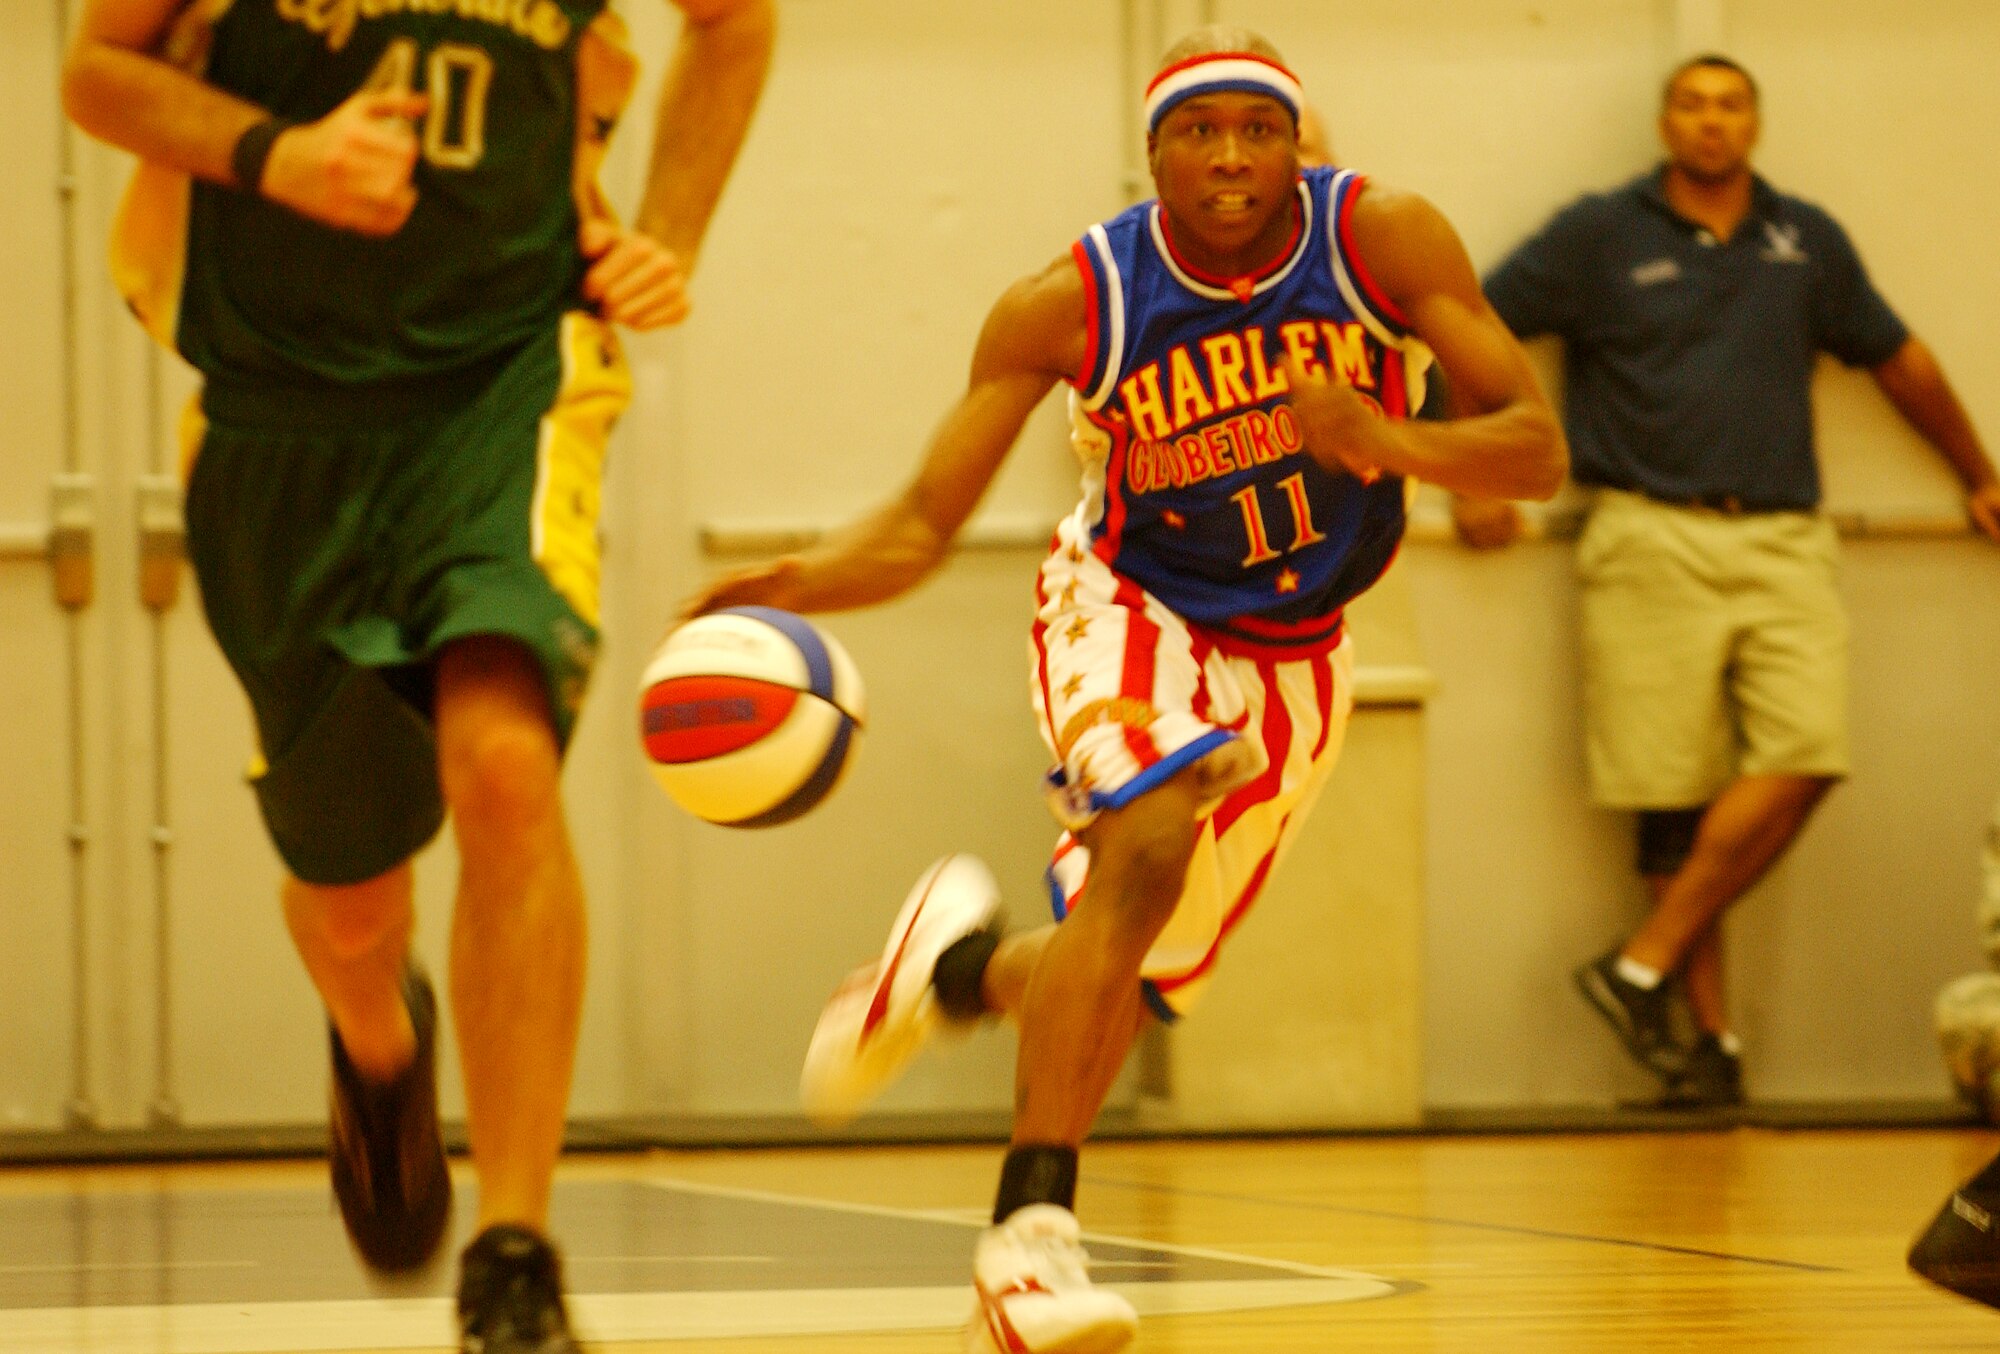 Sweet Pea Shine, a Harlem Globetrotter, dribbles the ball to the hoop Dec. 12 during an exhibition game versus the Washington Generals at the Risner Fitness Center here. While both teams play to win, the Globetrotters mix in their brand of show basketball to entertain the crowd.
(U.S. Air Force official photo/Staff Sgt. Nestor Cruz)